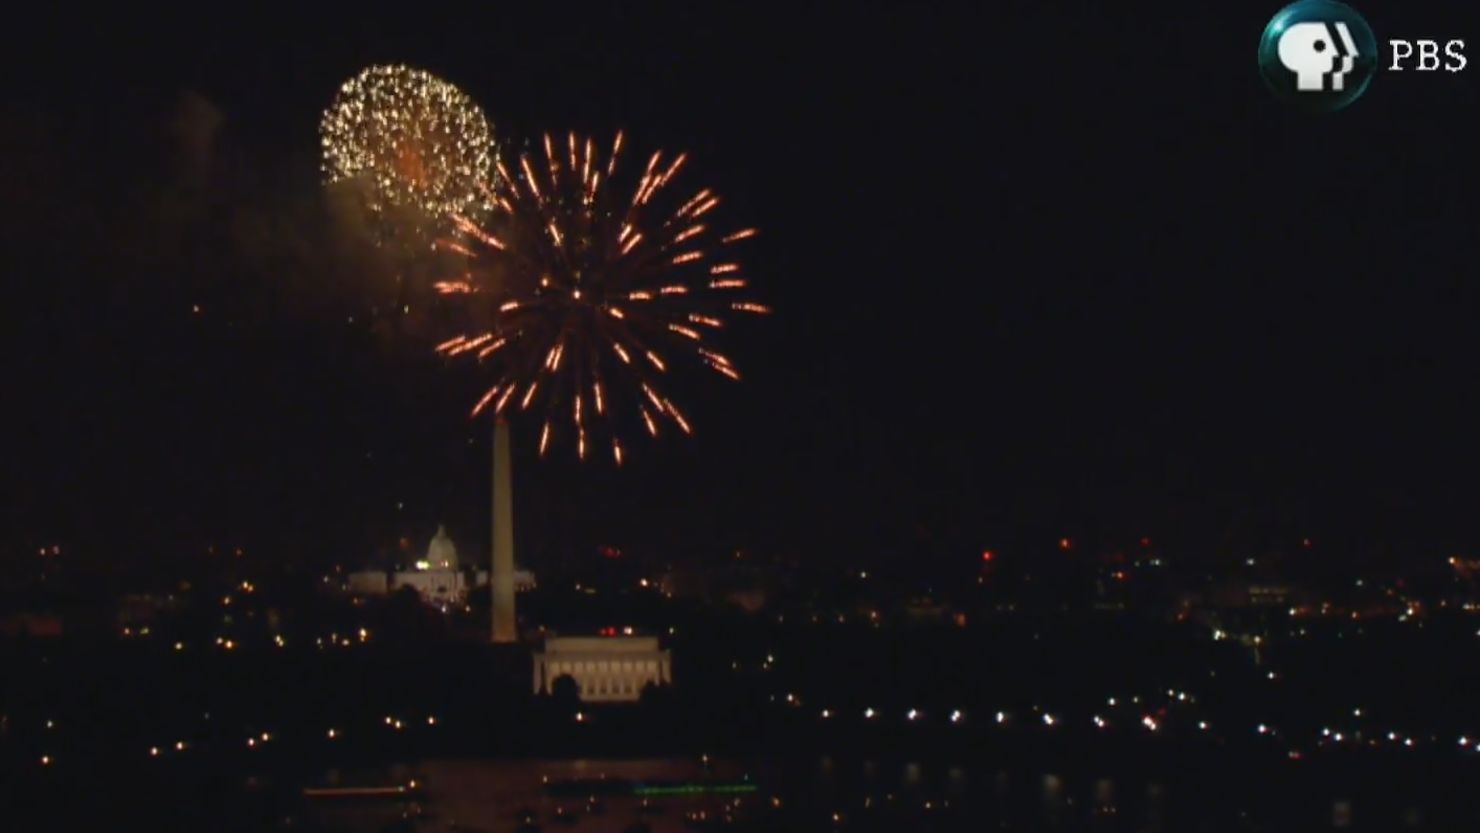 If you watched the fireworks show on PBS Monday night, this is what you saw -- a clearer view than what people saw in person.